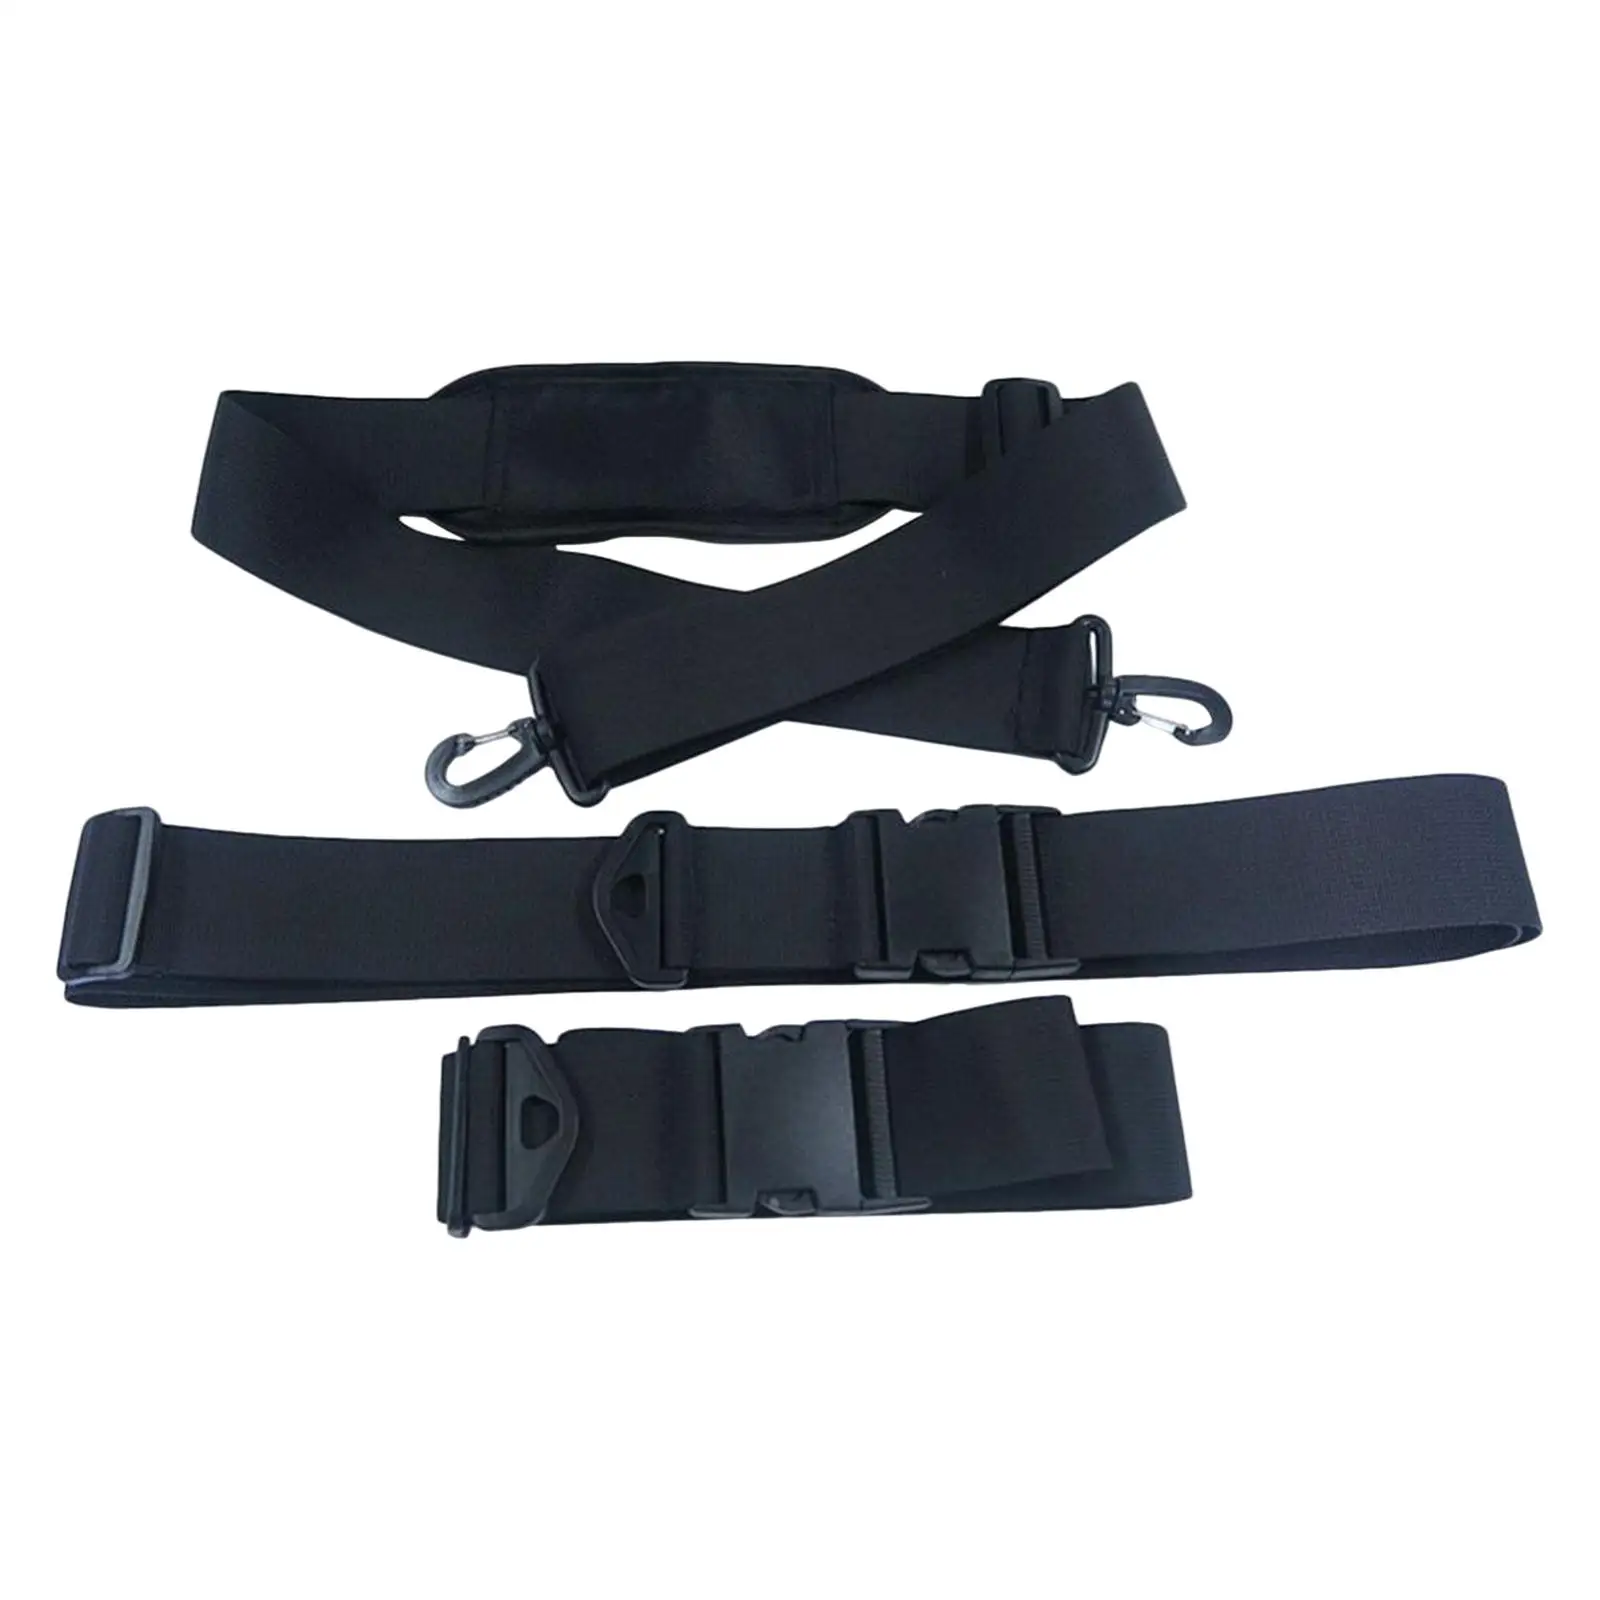 Paddle Board Shoulder Strap Carrier Universal Carrying Sling Padded Bag Belt for Inflatable Rafts Stand up Paddle Board Surfing